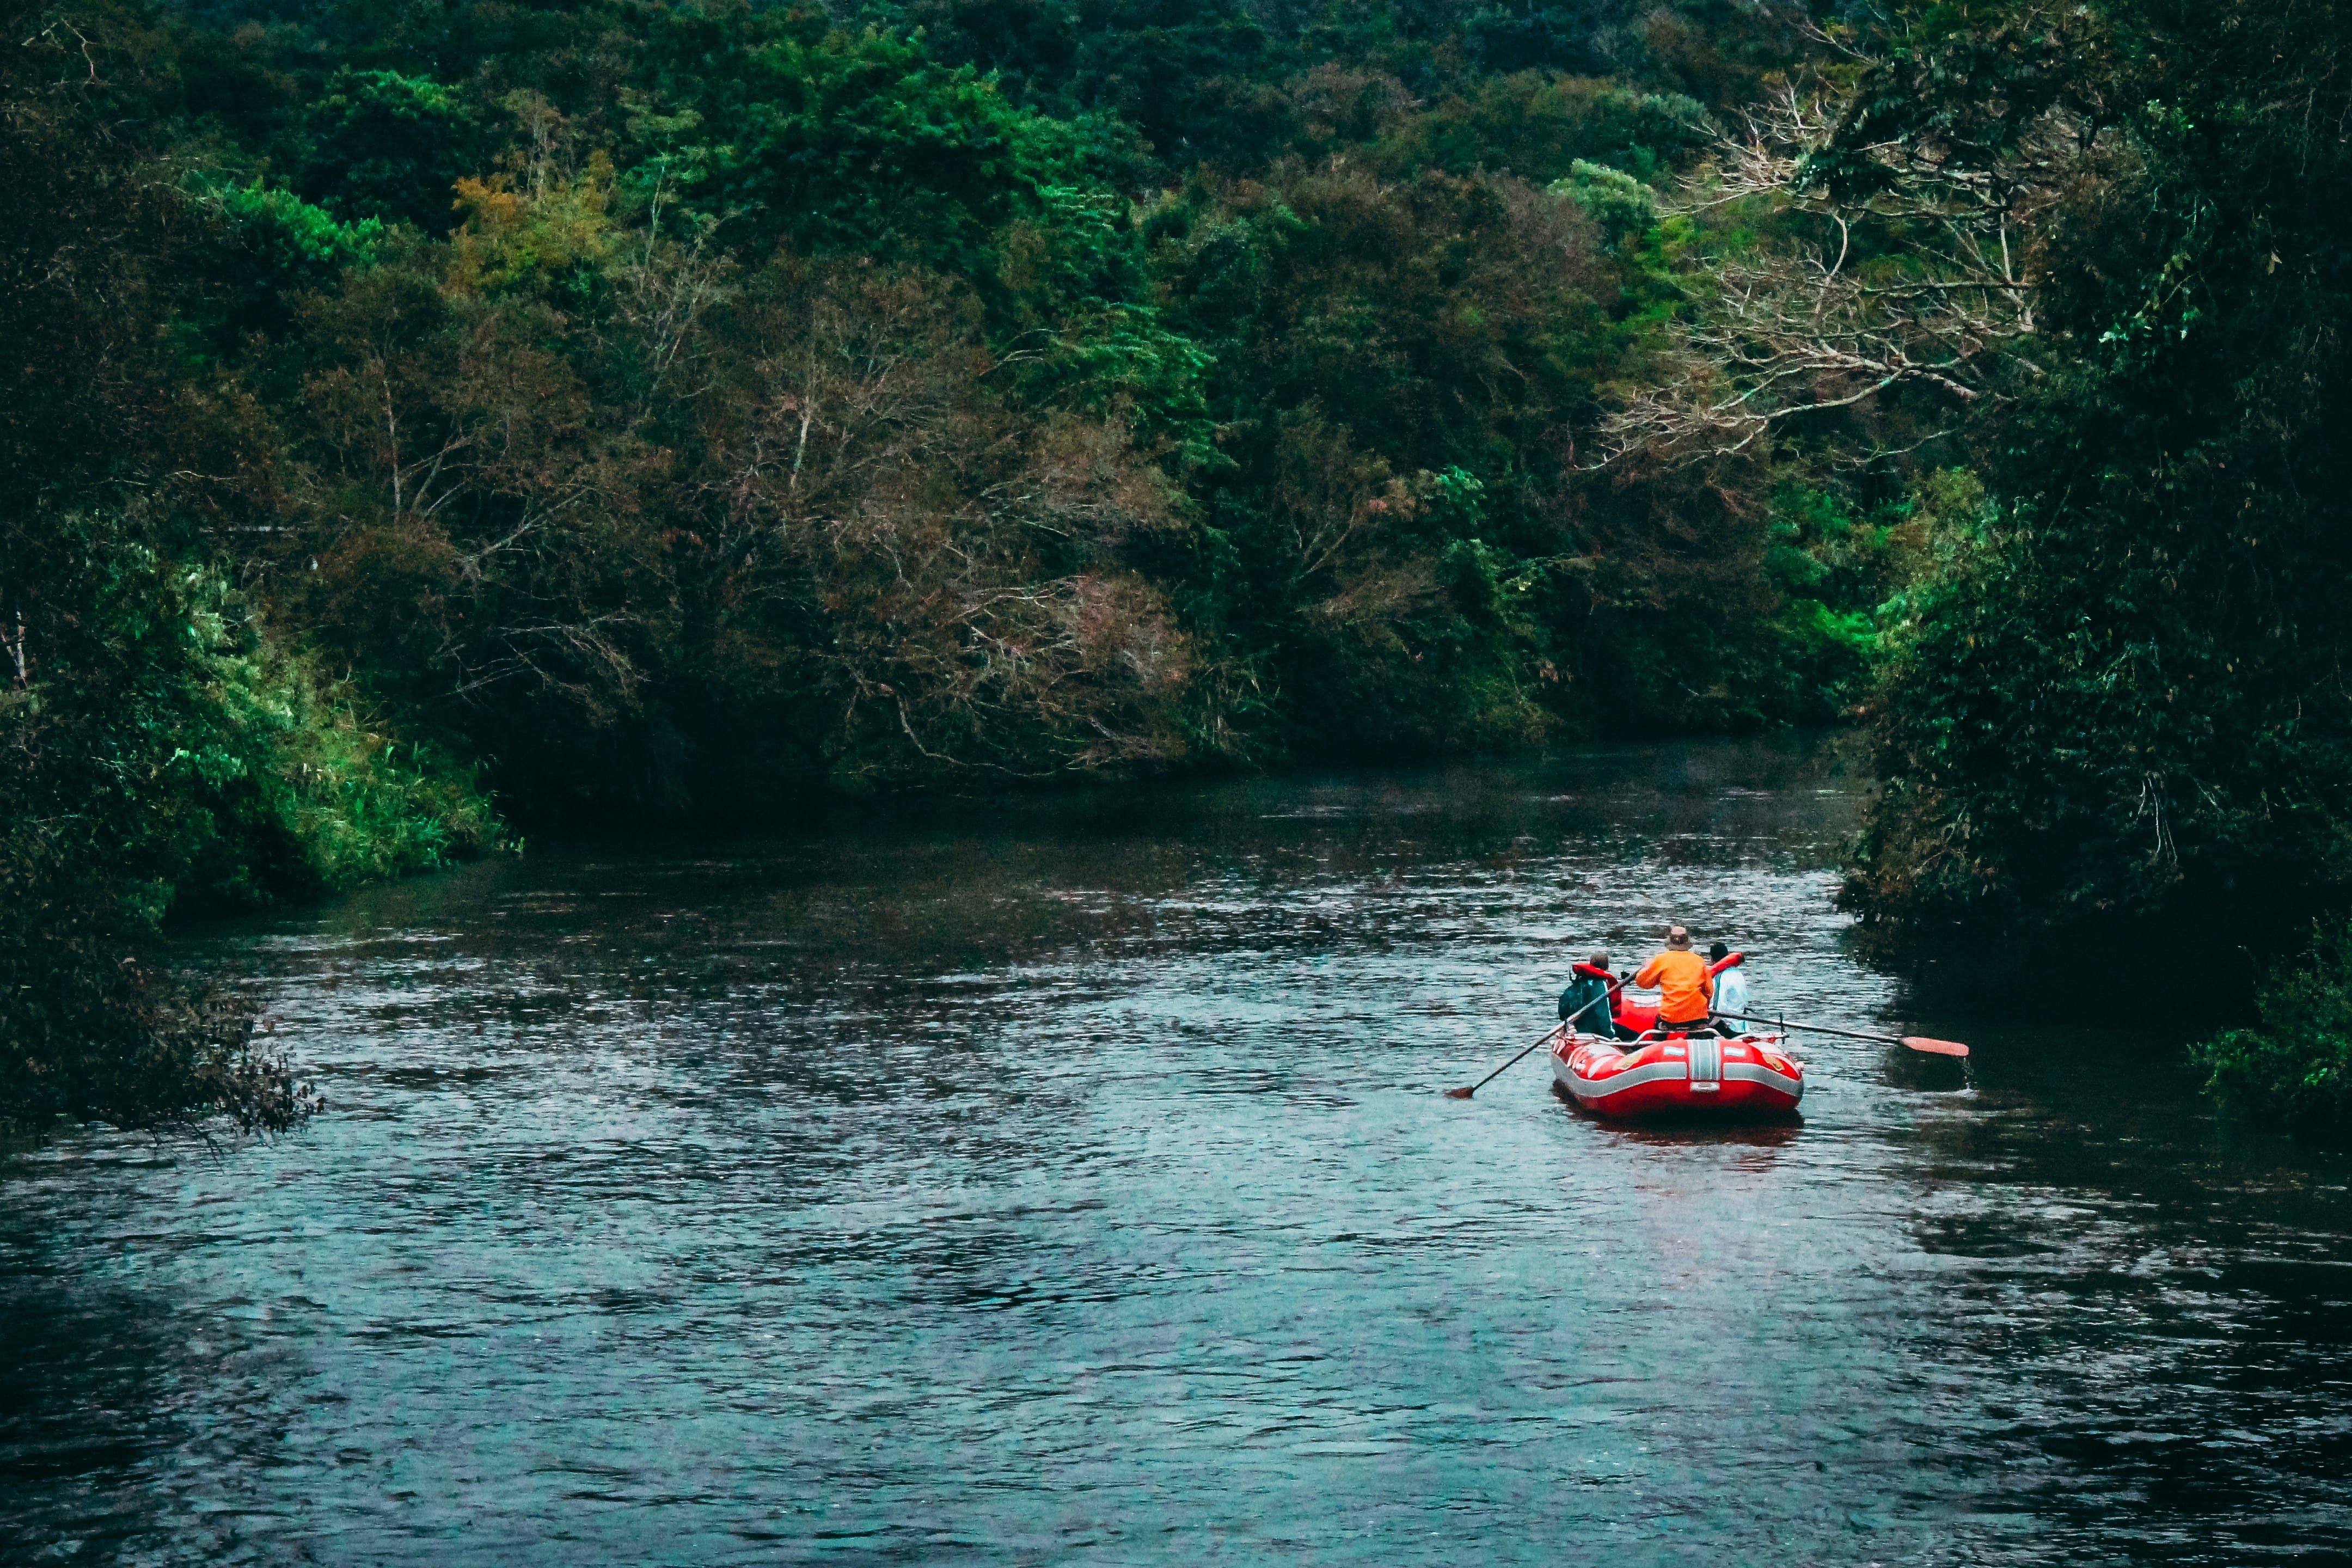 River Rafting in Kerala: A Guide To Planning This Water Adventure